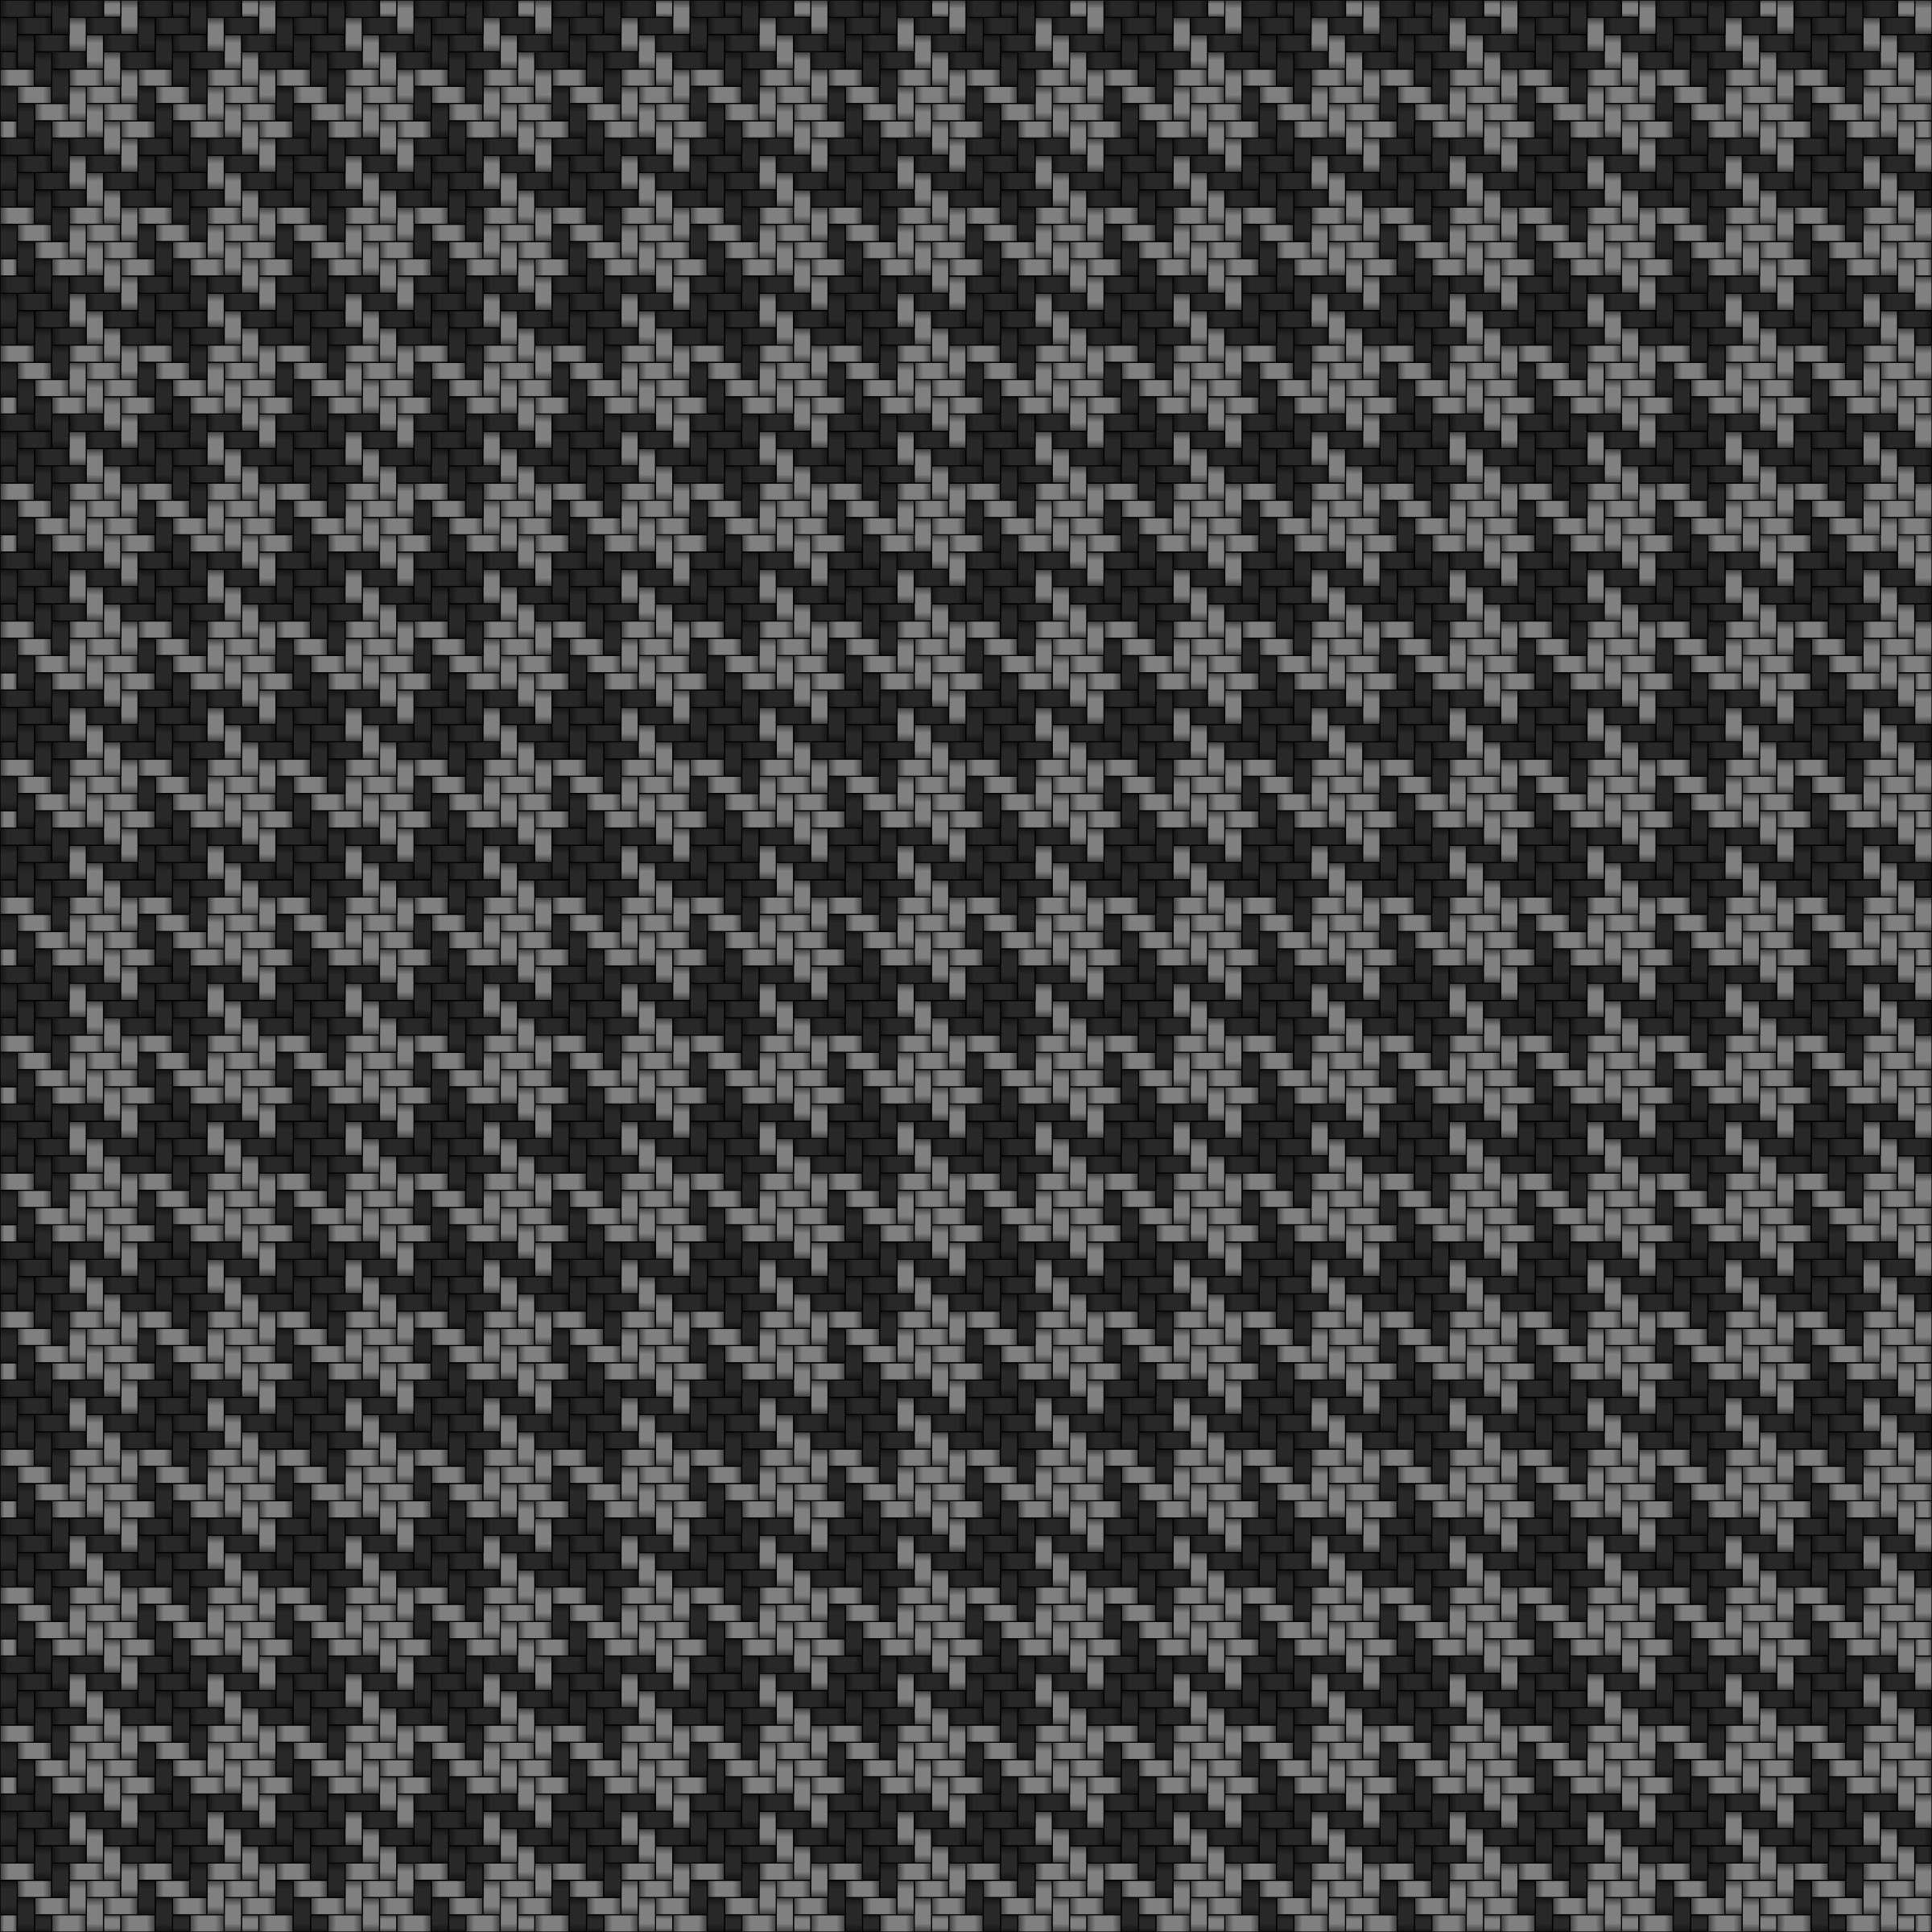 Hounds-tooth Fabric Gray Black png